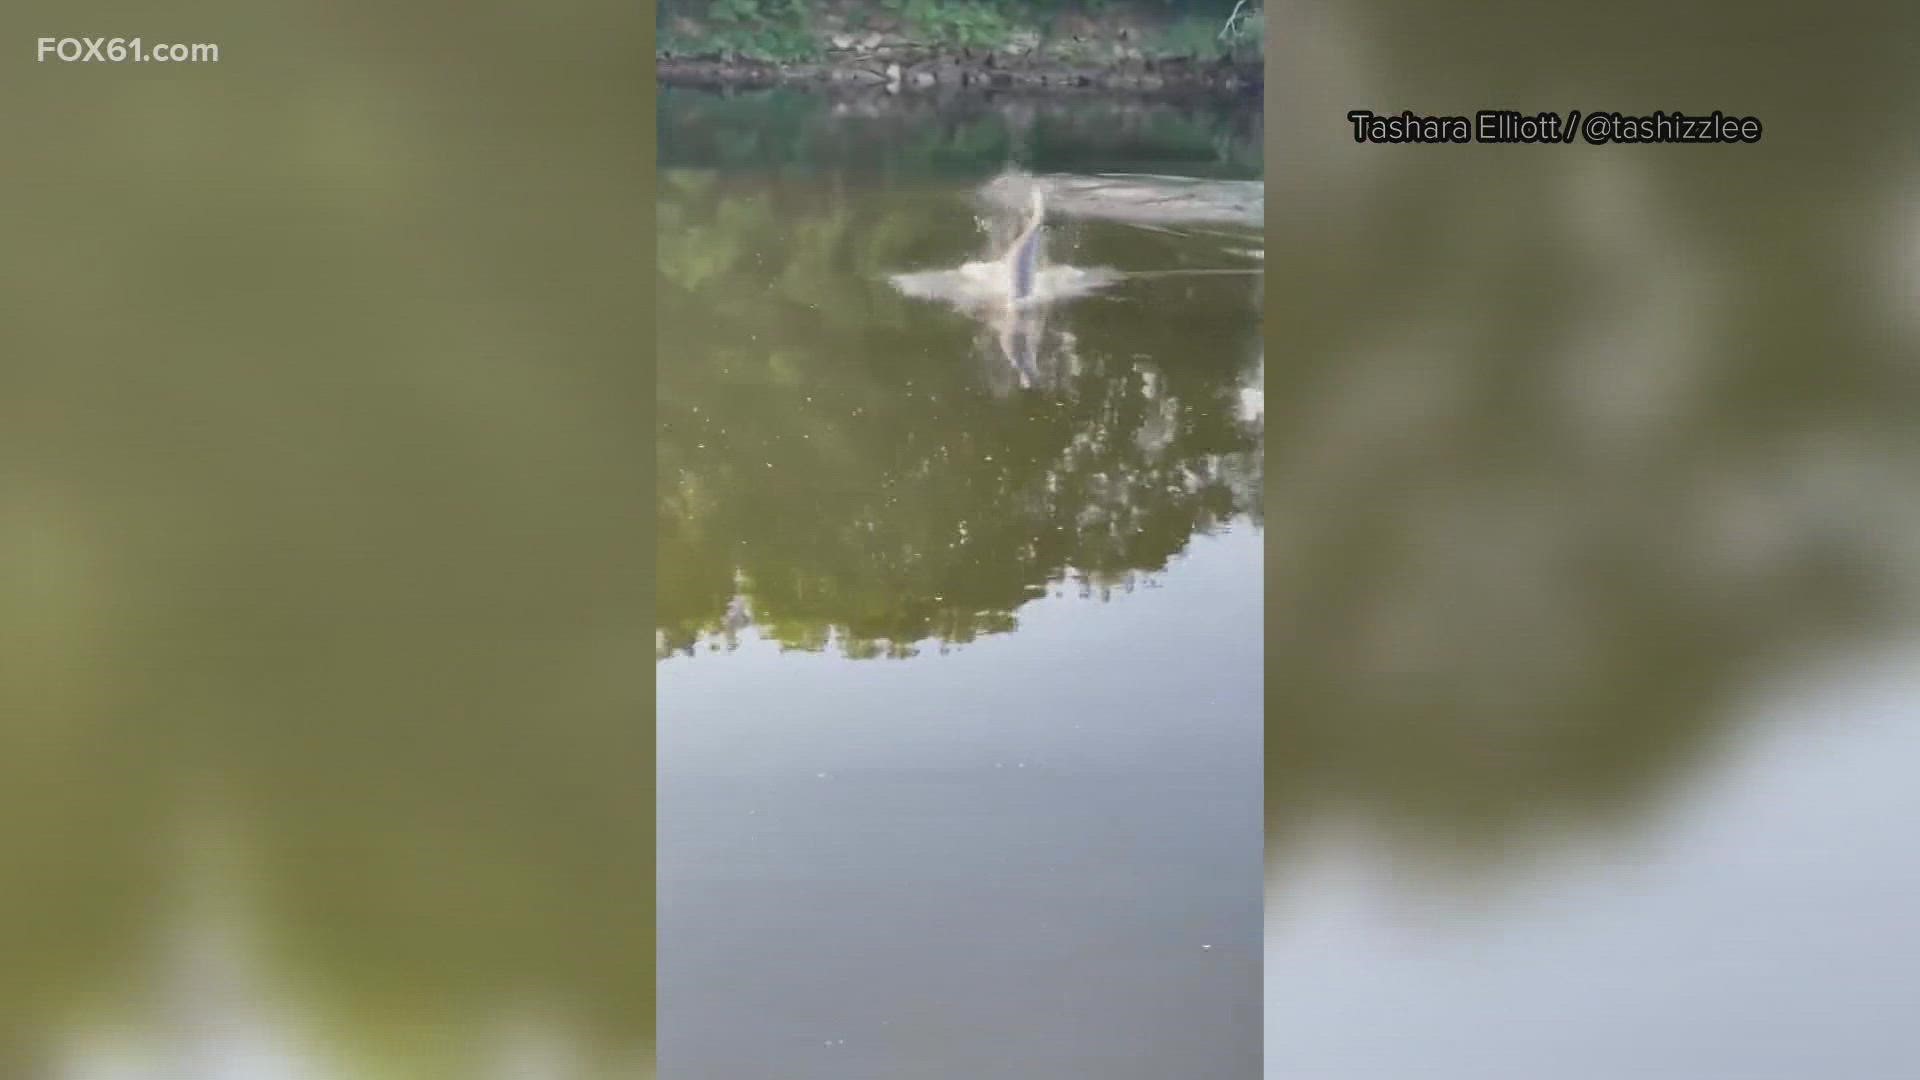 A wayward dolphin has been swimming in a Connecticut river after making its way upstream from Long Island Sound.